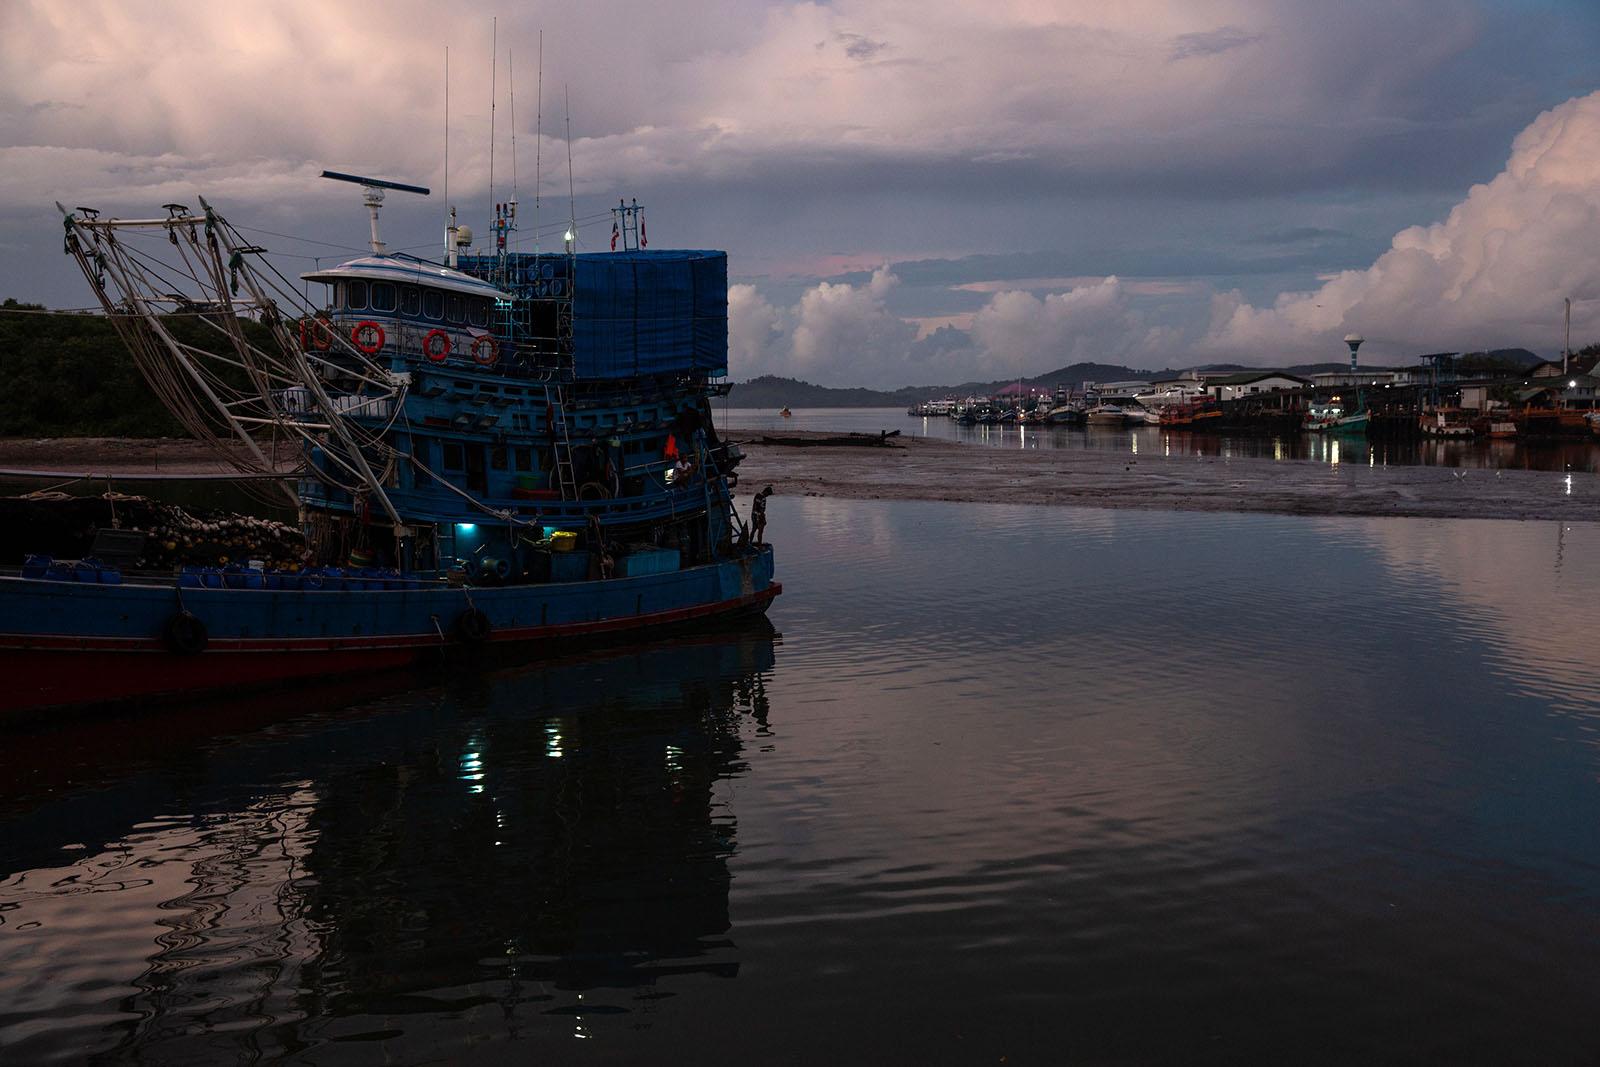 LIFE ON THE OTHER SIDE - Phuket Port, Phuket - A migrant worker from Myanmar...